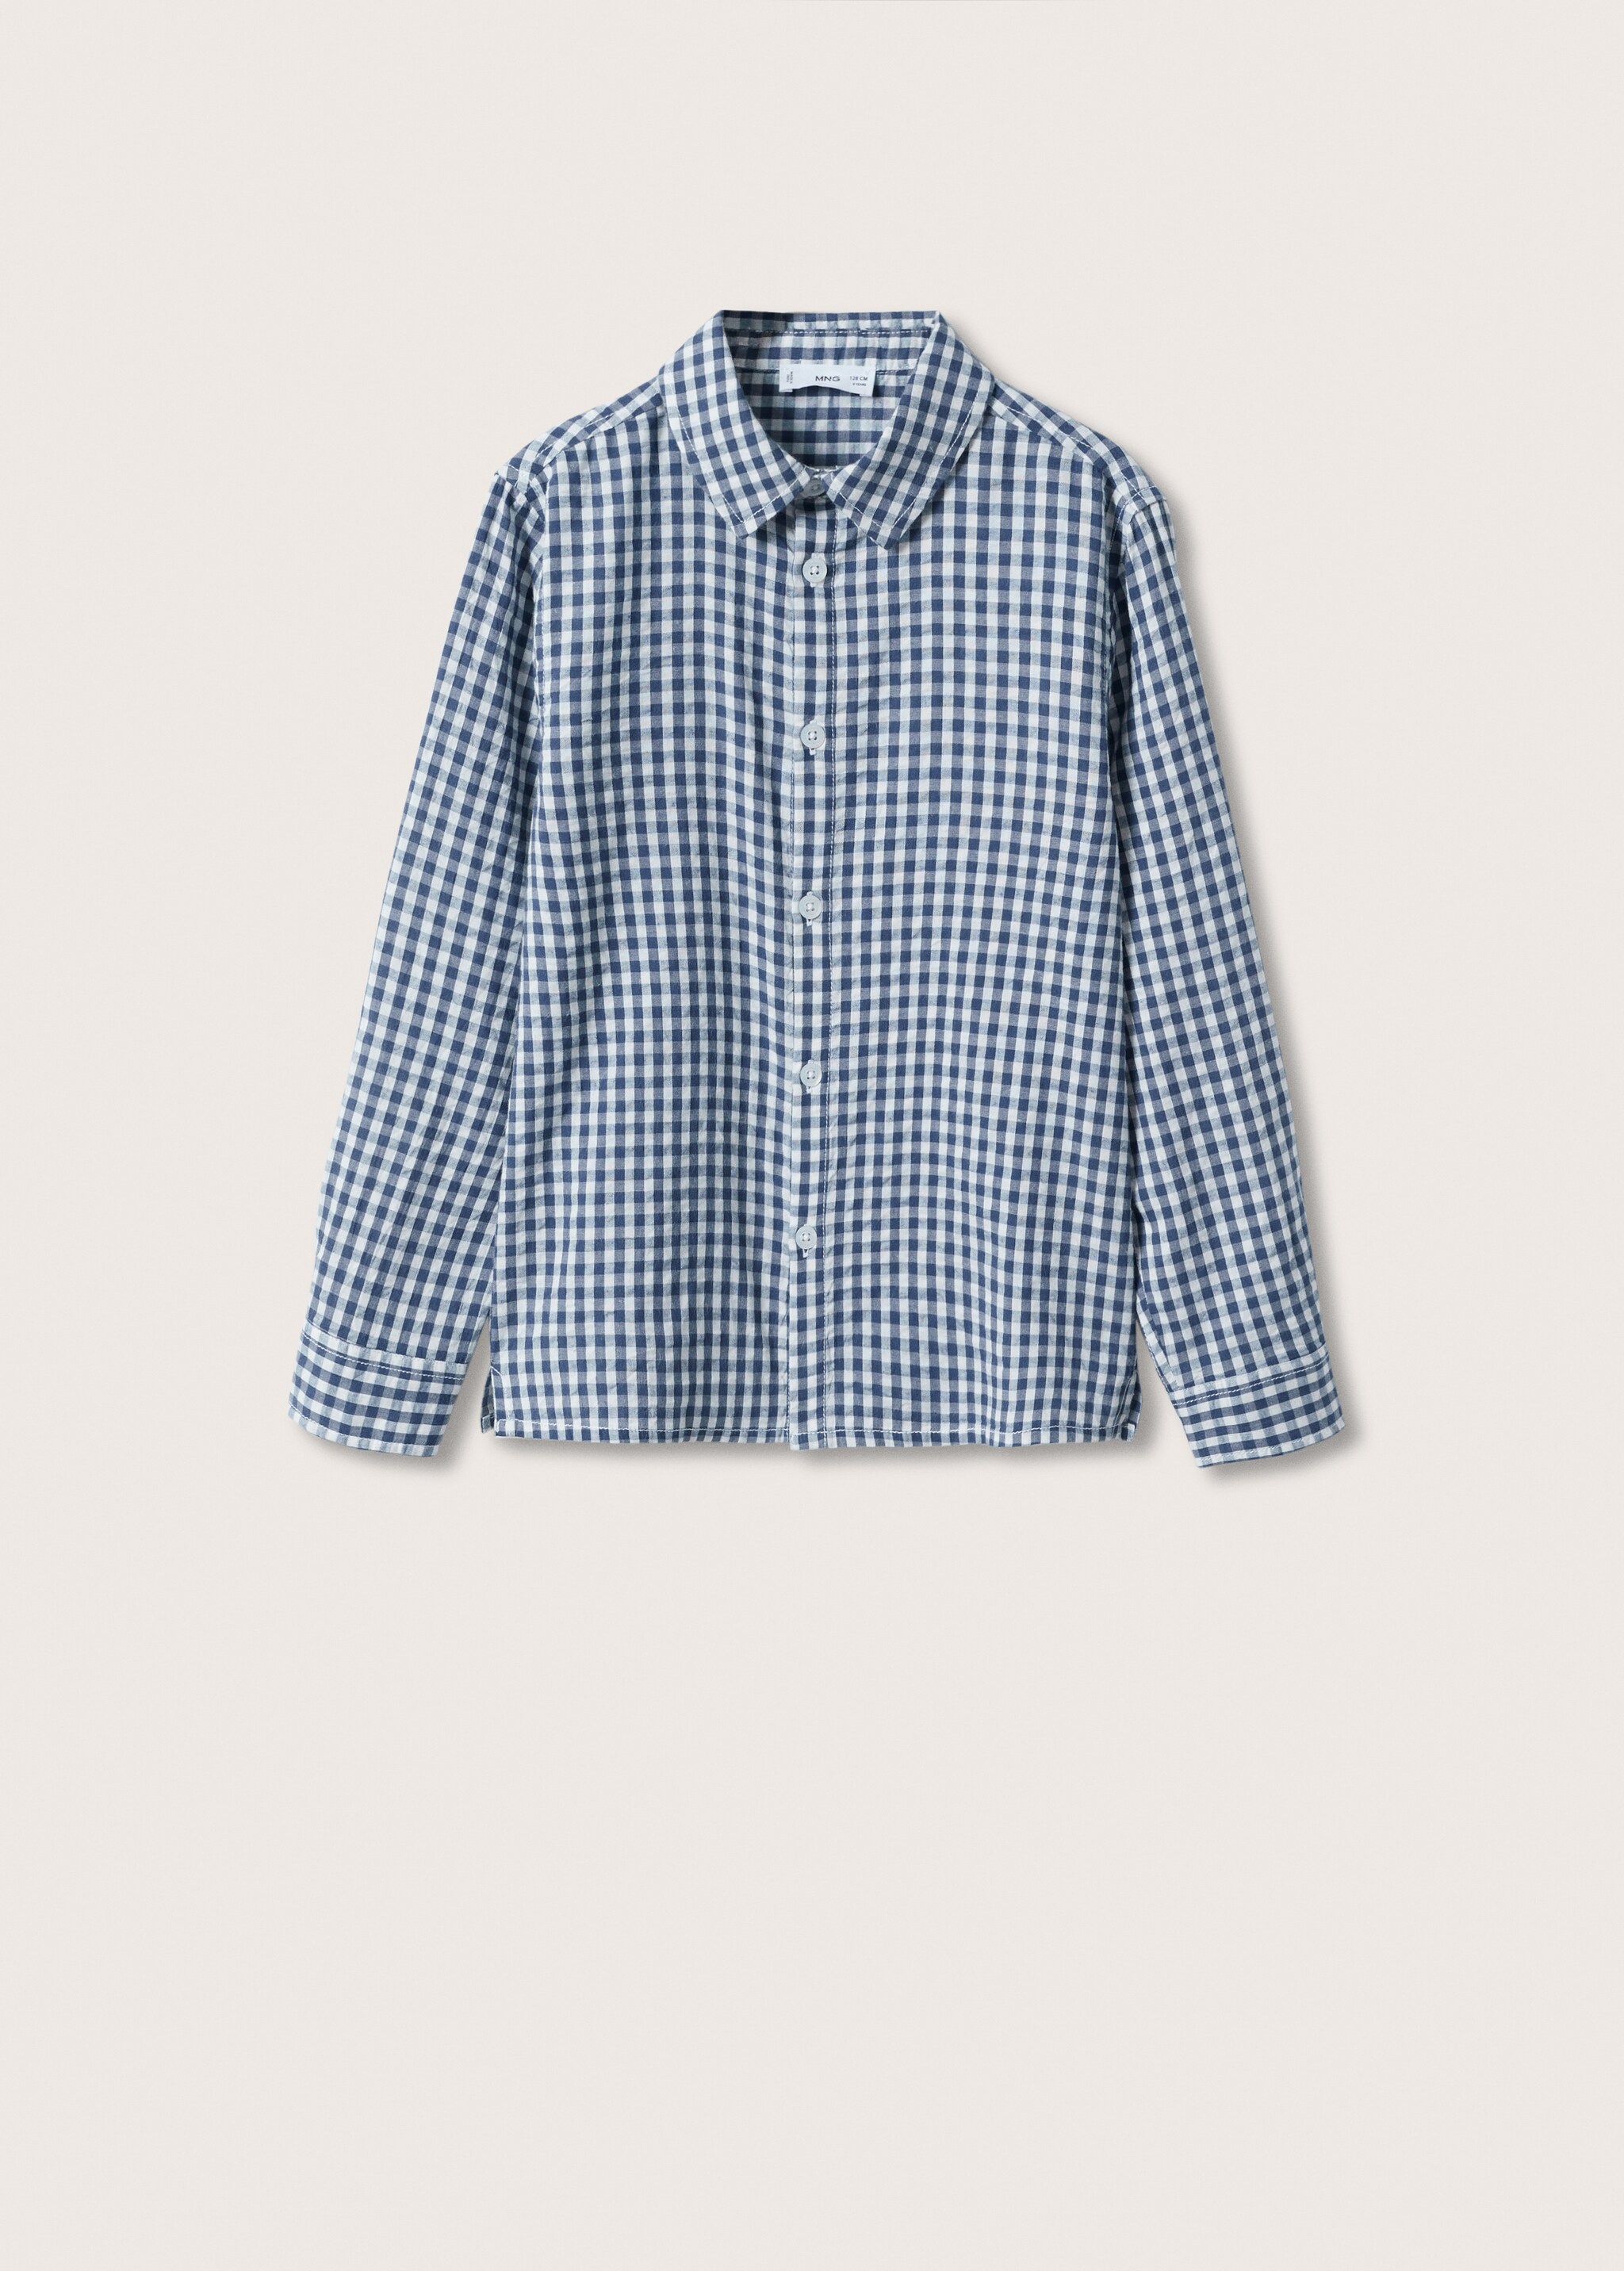 Gingham check shirt - Article without model